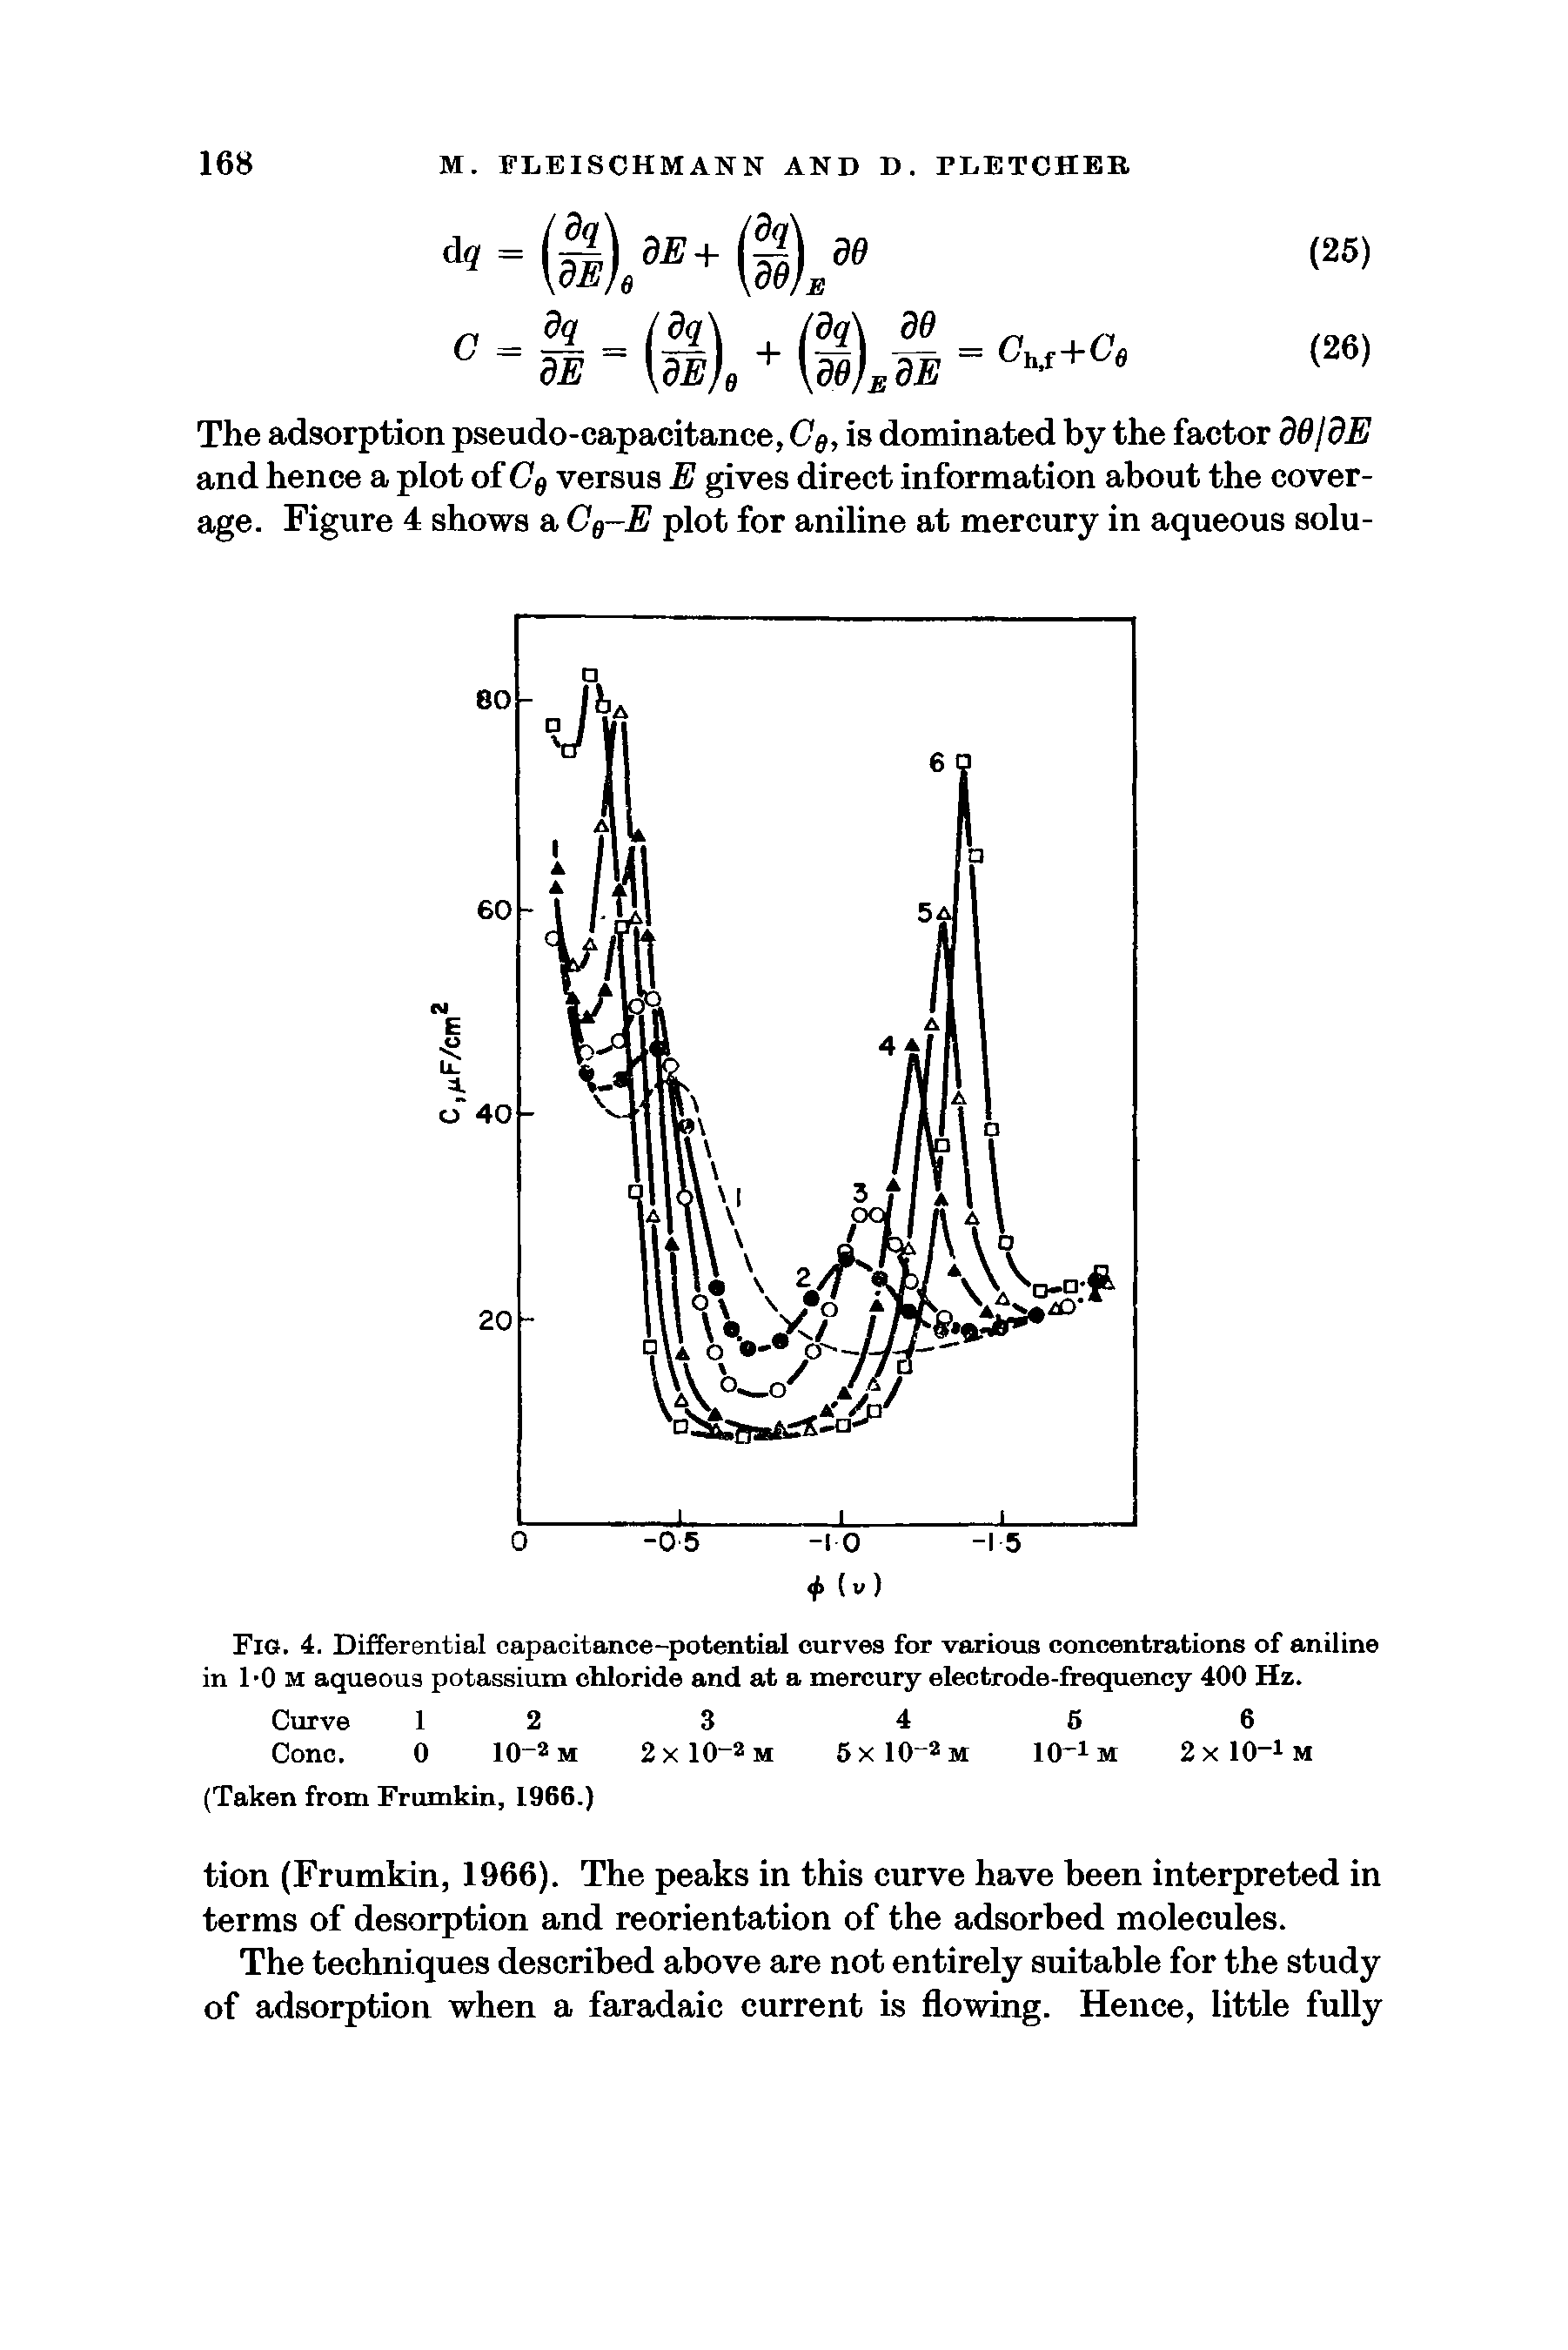 Fig. 4. Differential capacitance-potential curves for various concentrations of aniline in 1-0 M aqueous potassium chloride and at a mercury electrode-frequency 400 Hz.